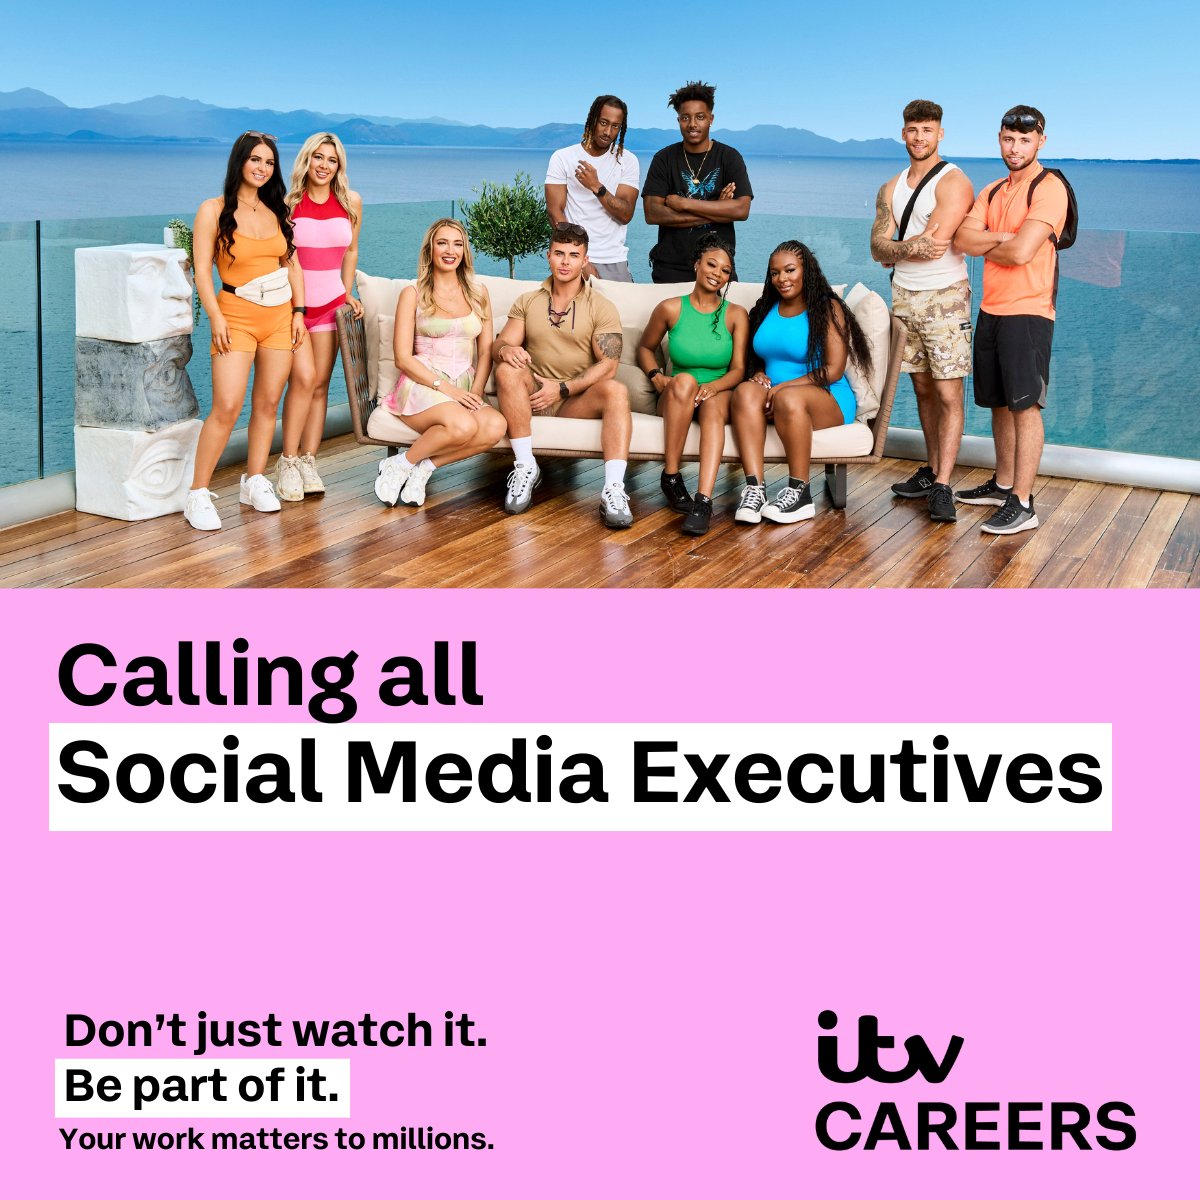 We're actively seeking two dynamic Social Media Executives to join our team in London on a 6-month Fixed-Term Contract.

Find out more about the role here: lnkd.in/eJvhU9jm

#socialmediajobs #ITVcareers #contractjobs